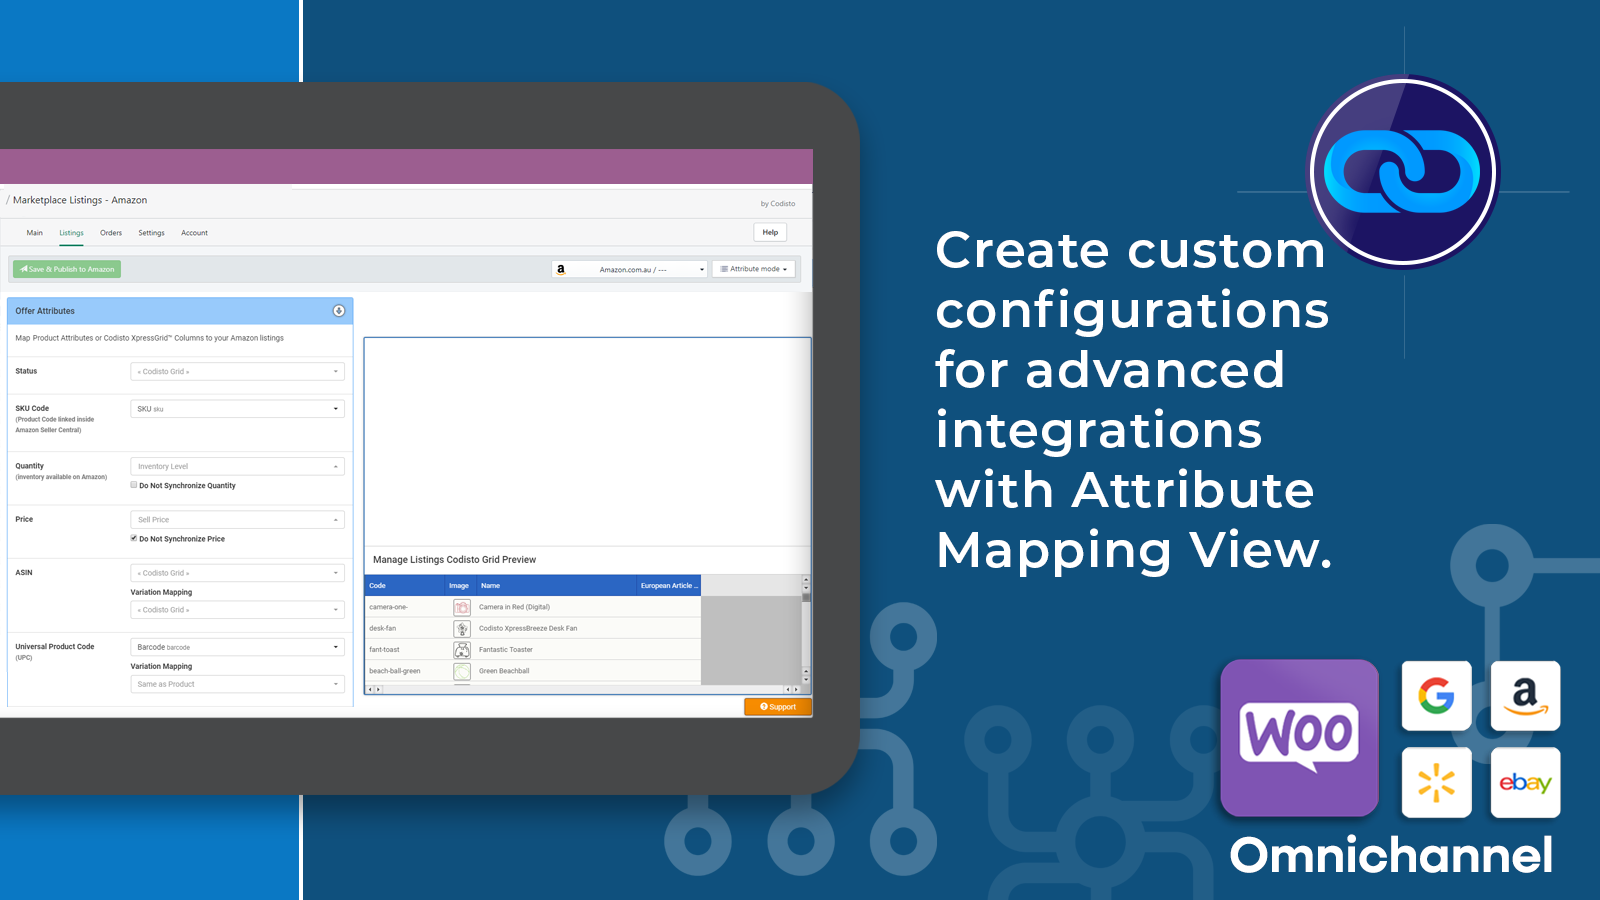 Create configurations for advanced integrations with Attribute Mapping